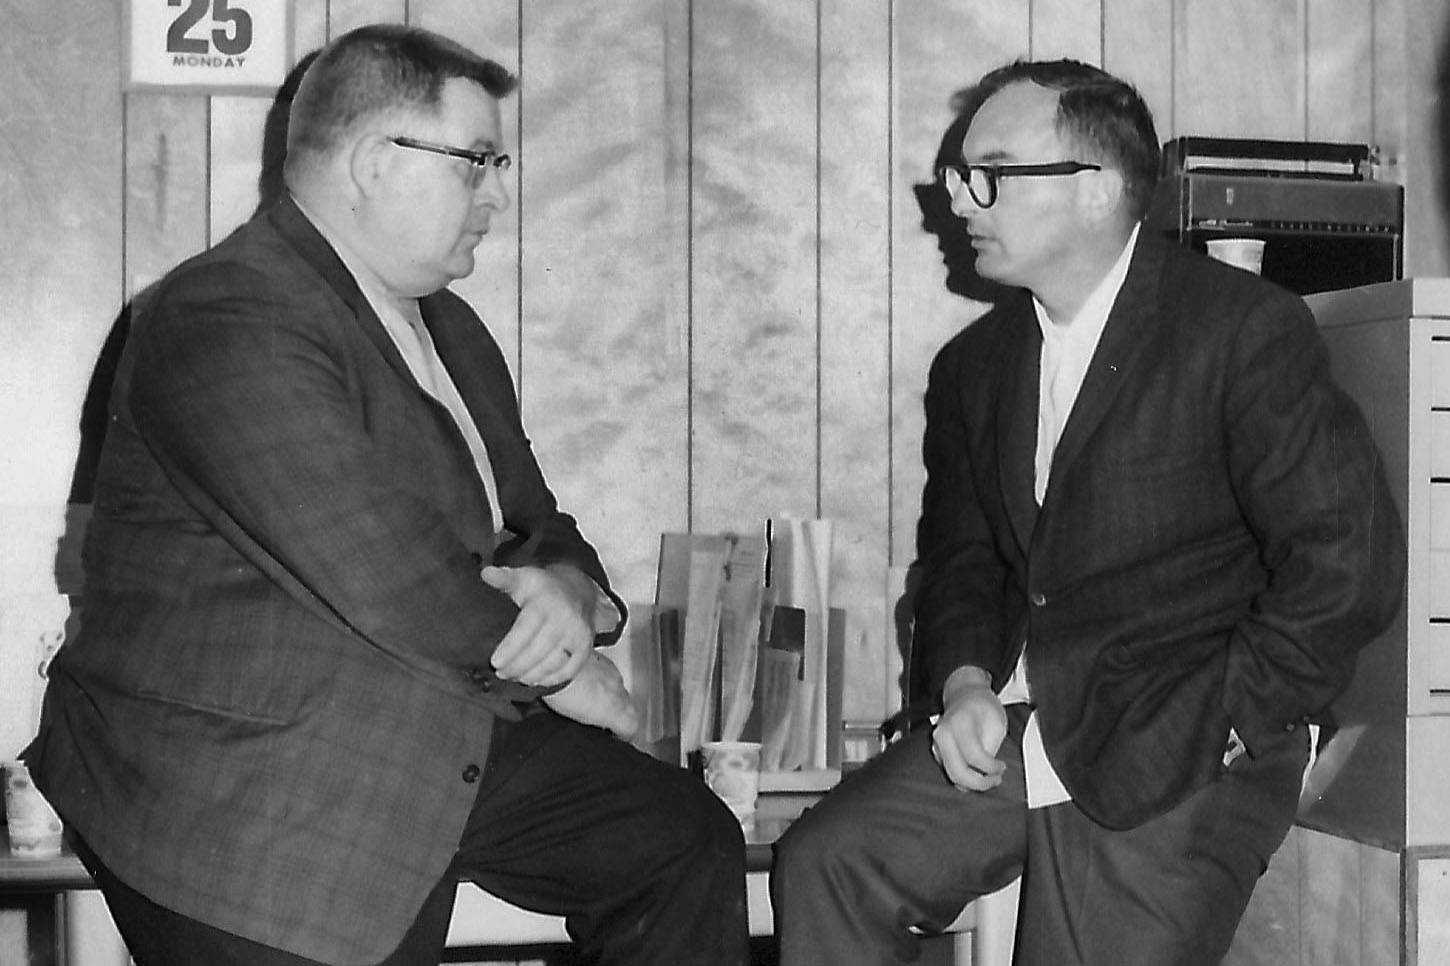 Photo courtesy of Gloria Wisecarver
Dr. Robert Struthers, Kenai’s third resident physician, and Kenai dentist Dr. Charles Bailie converse in Struthers’ office in Kenai in July 1966.